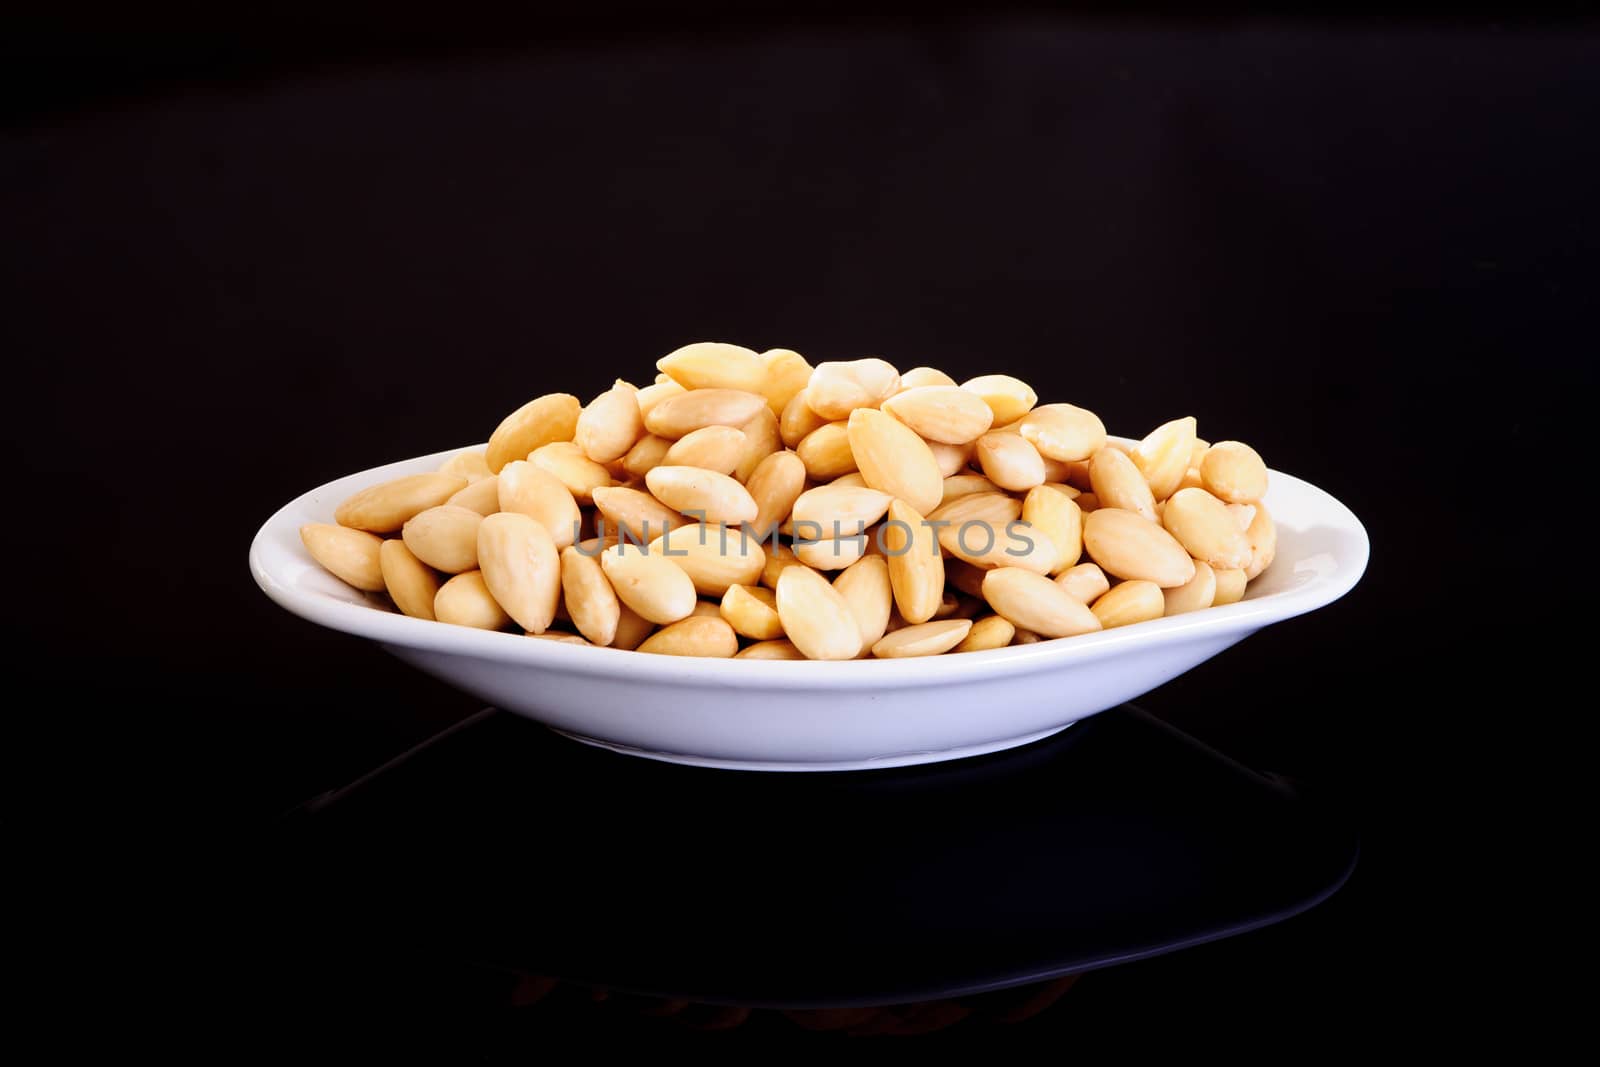 Blanched Almonds in a white plate on a black background